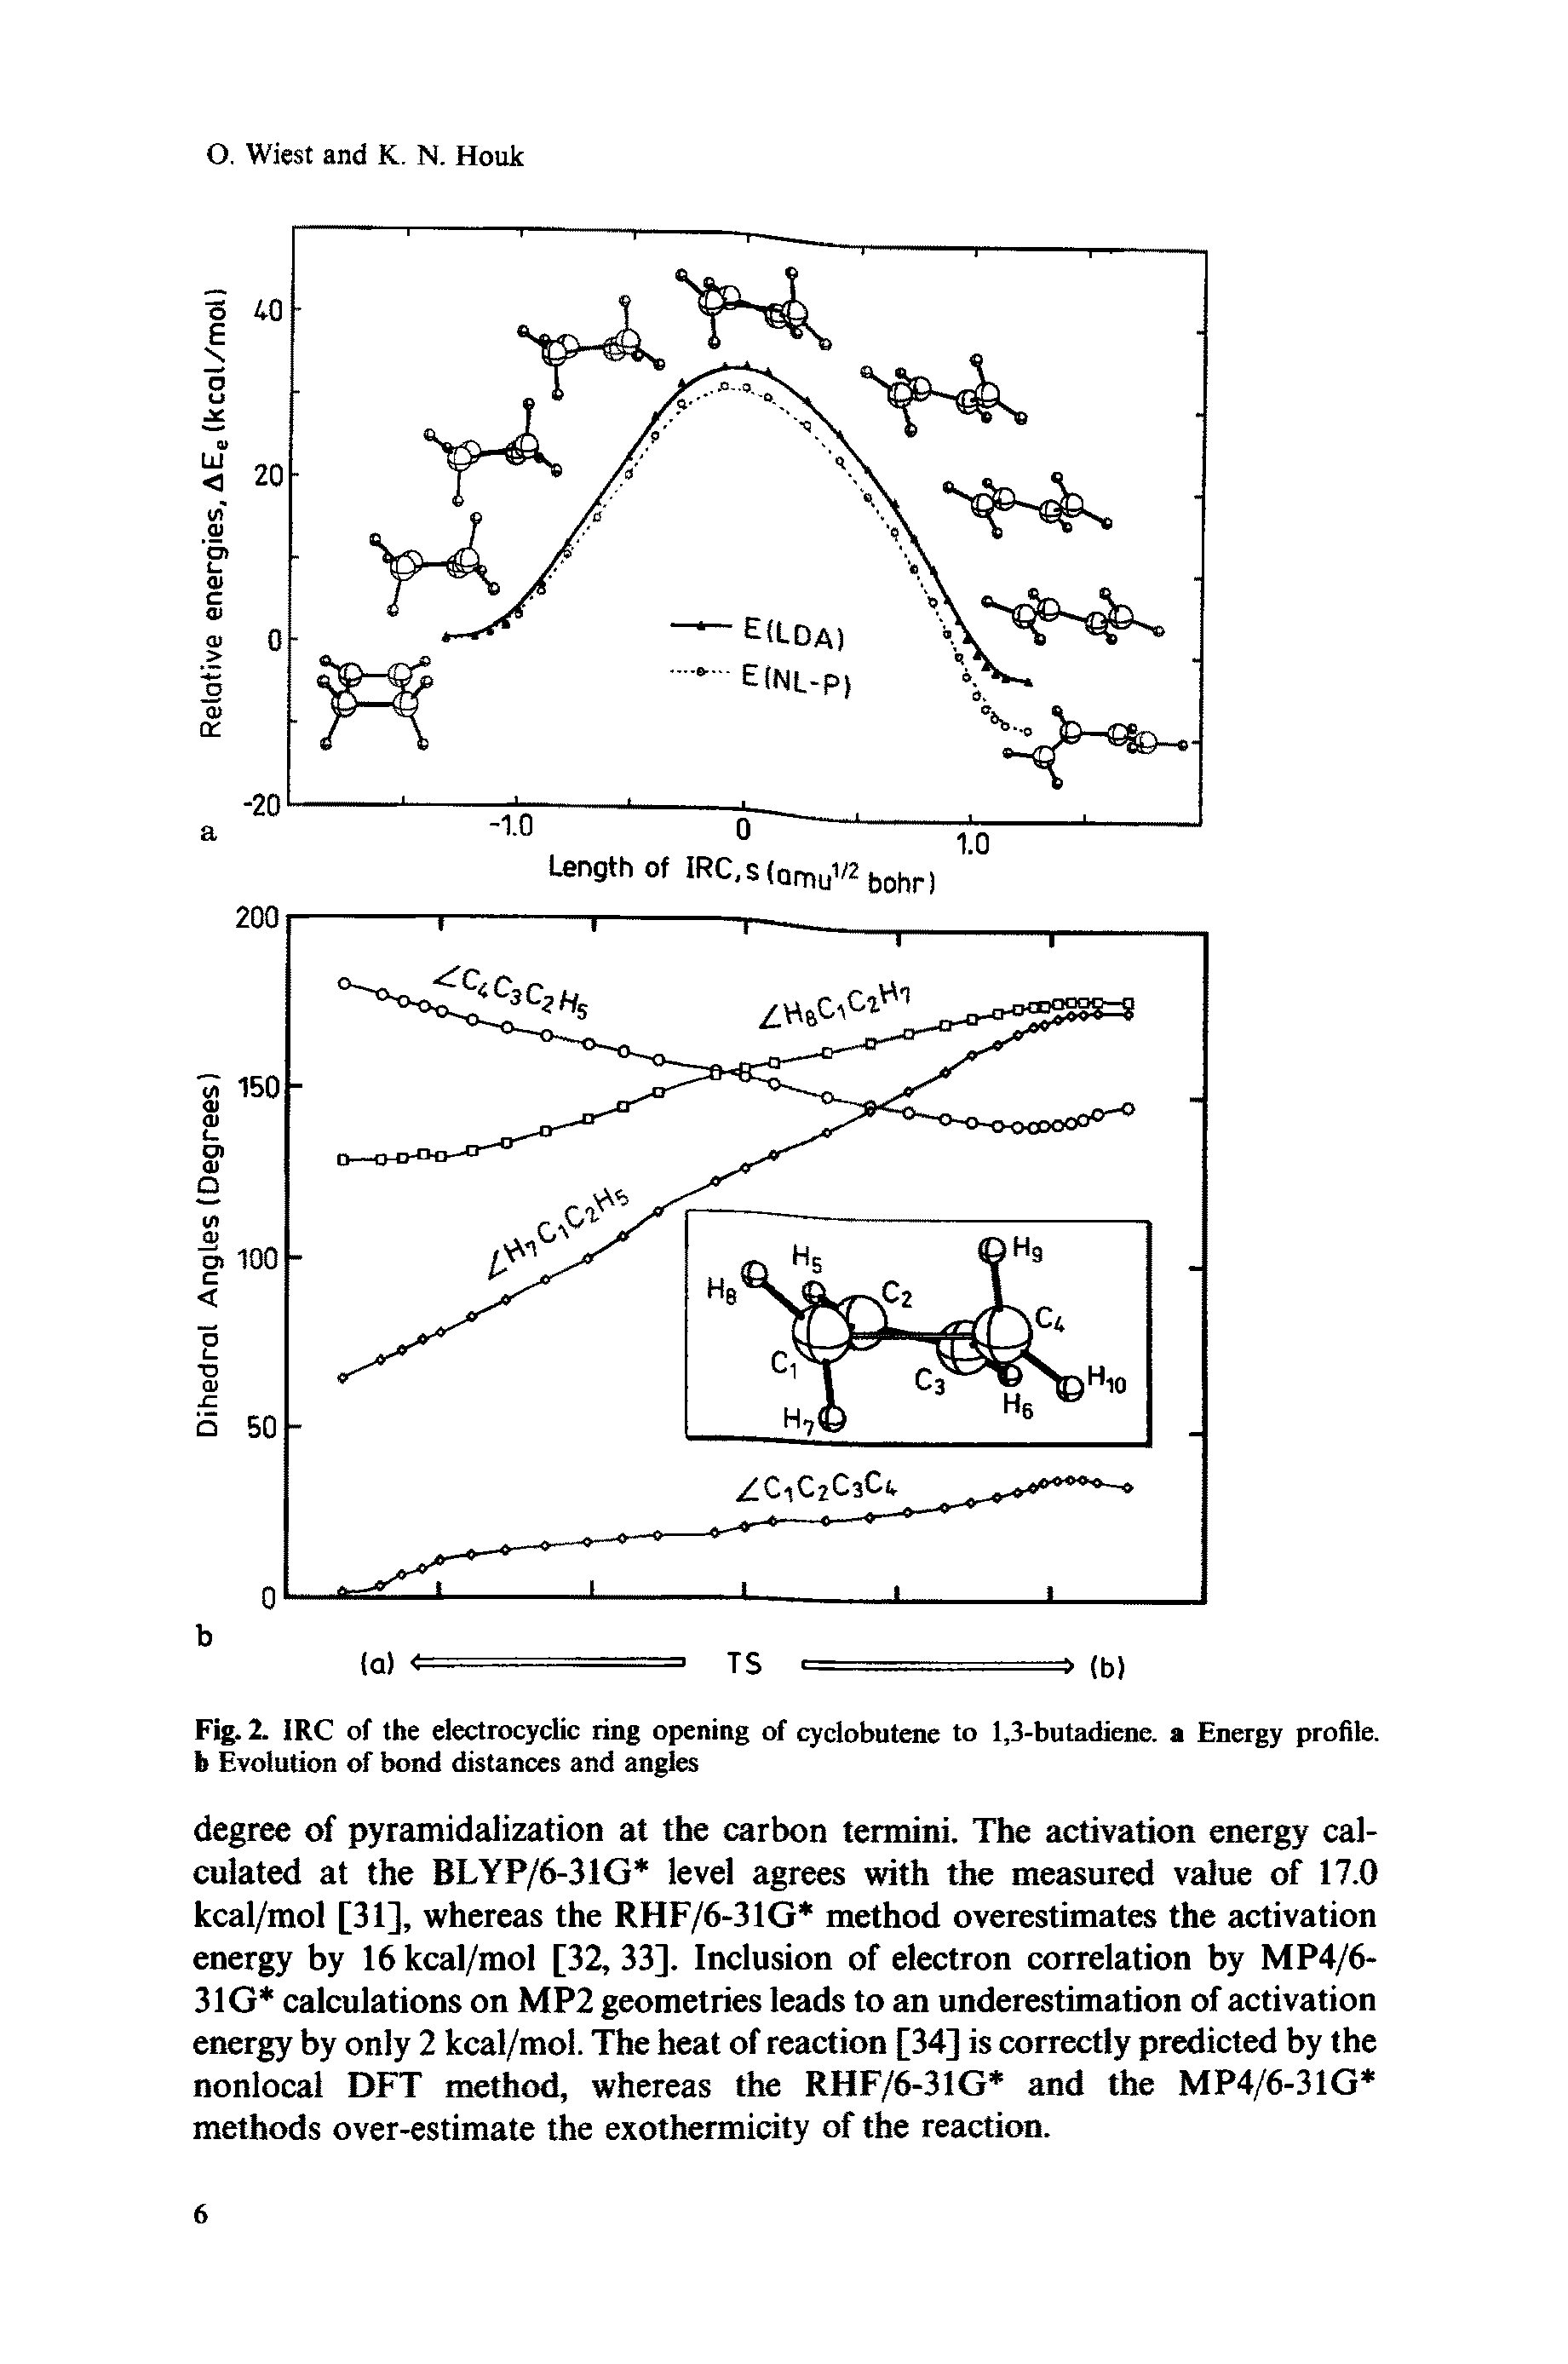 Fig. 2. IRC of the electrocyclic ring opening of cyclobutene to 1,3-butadiene, a Energy profile, h Evolution of bond distances and angles...